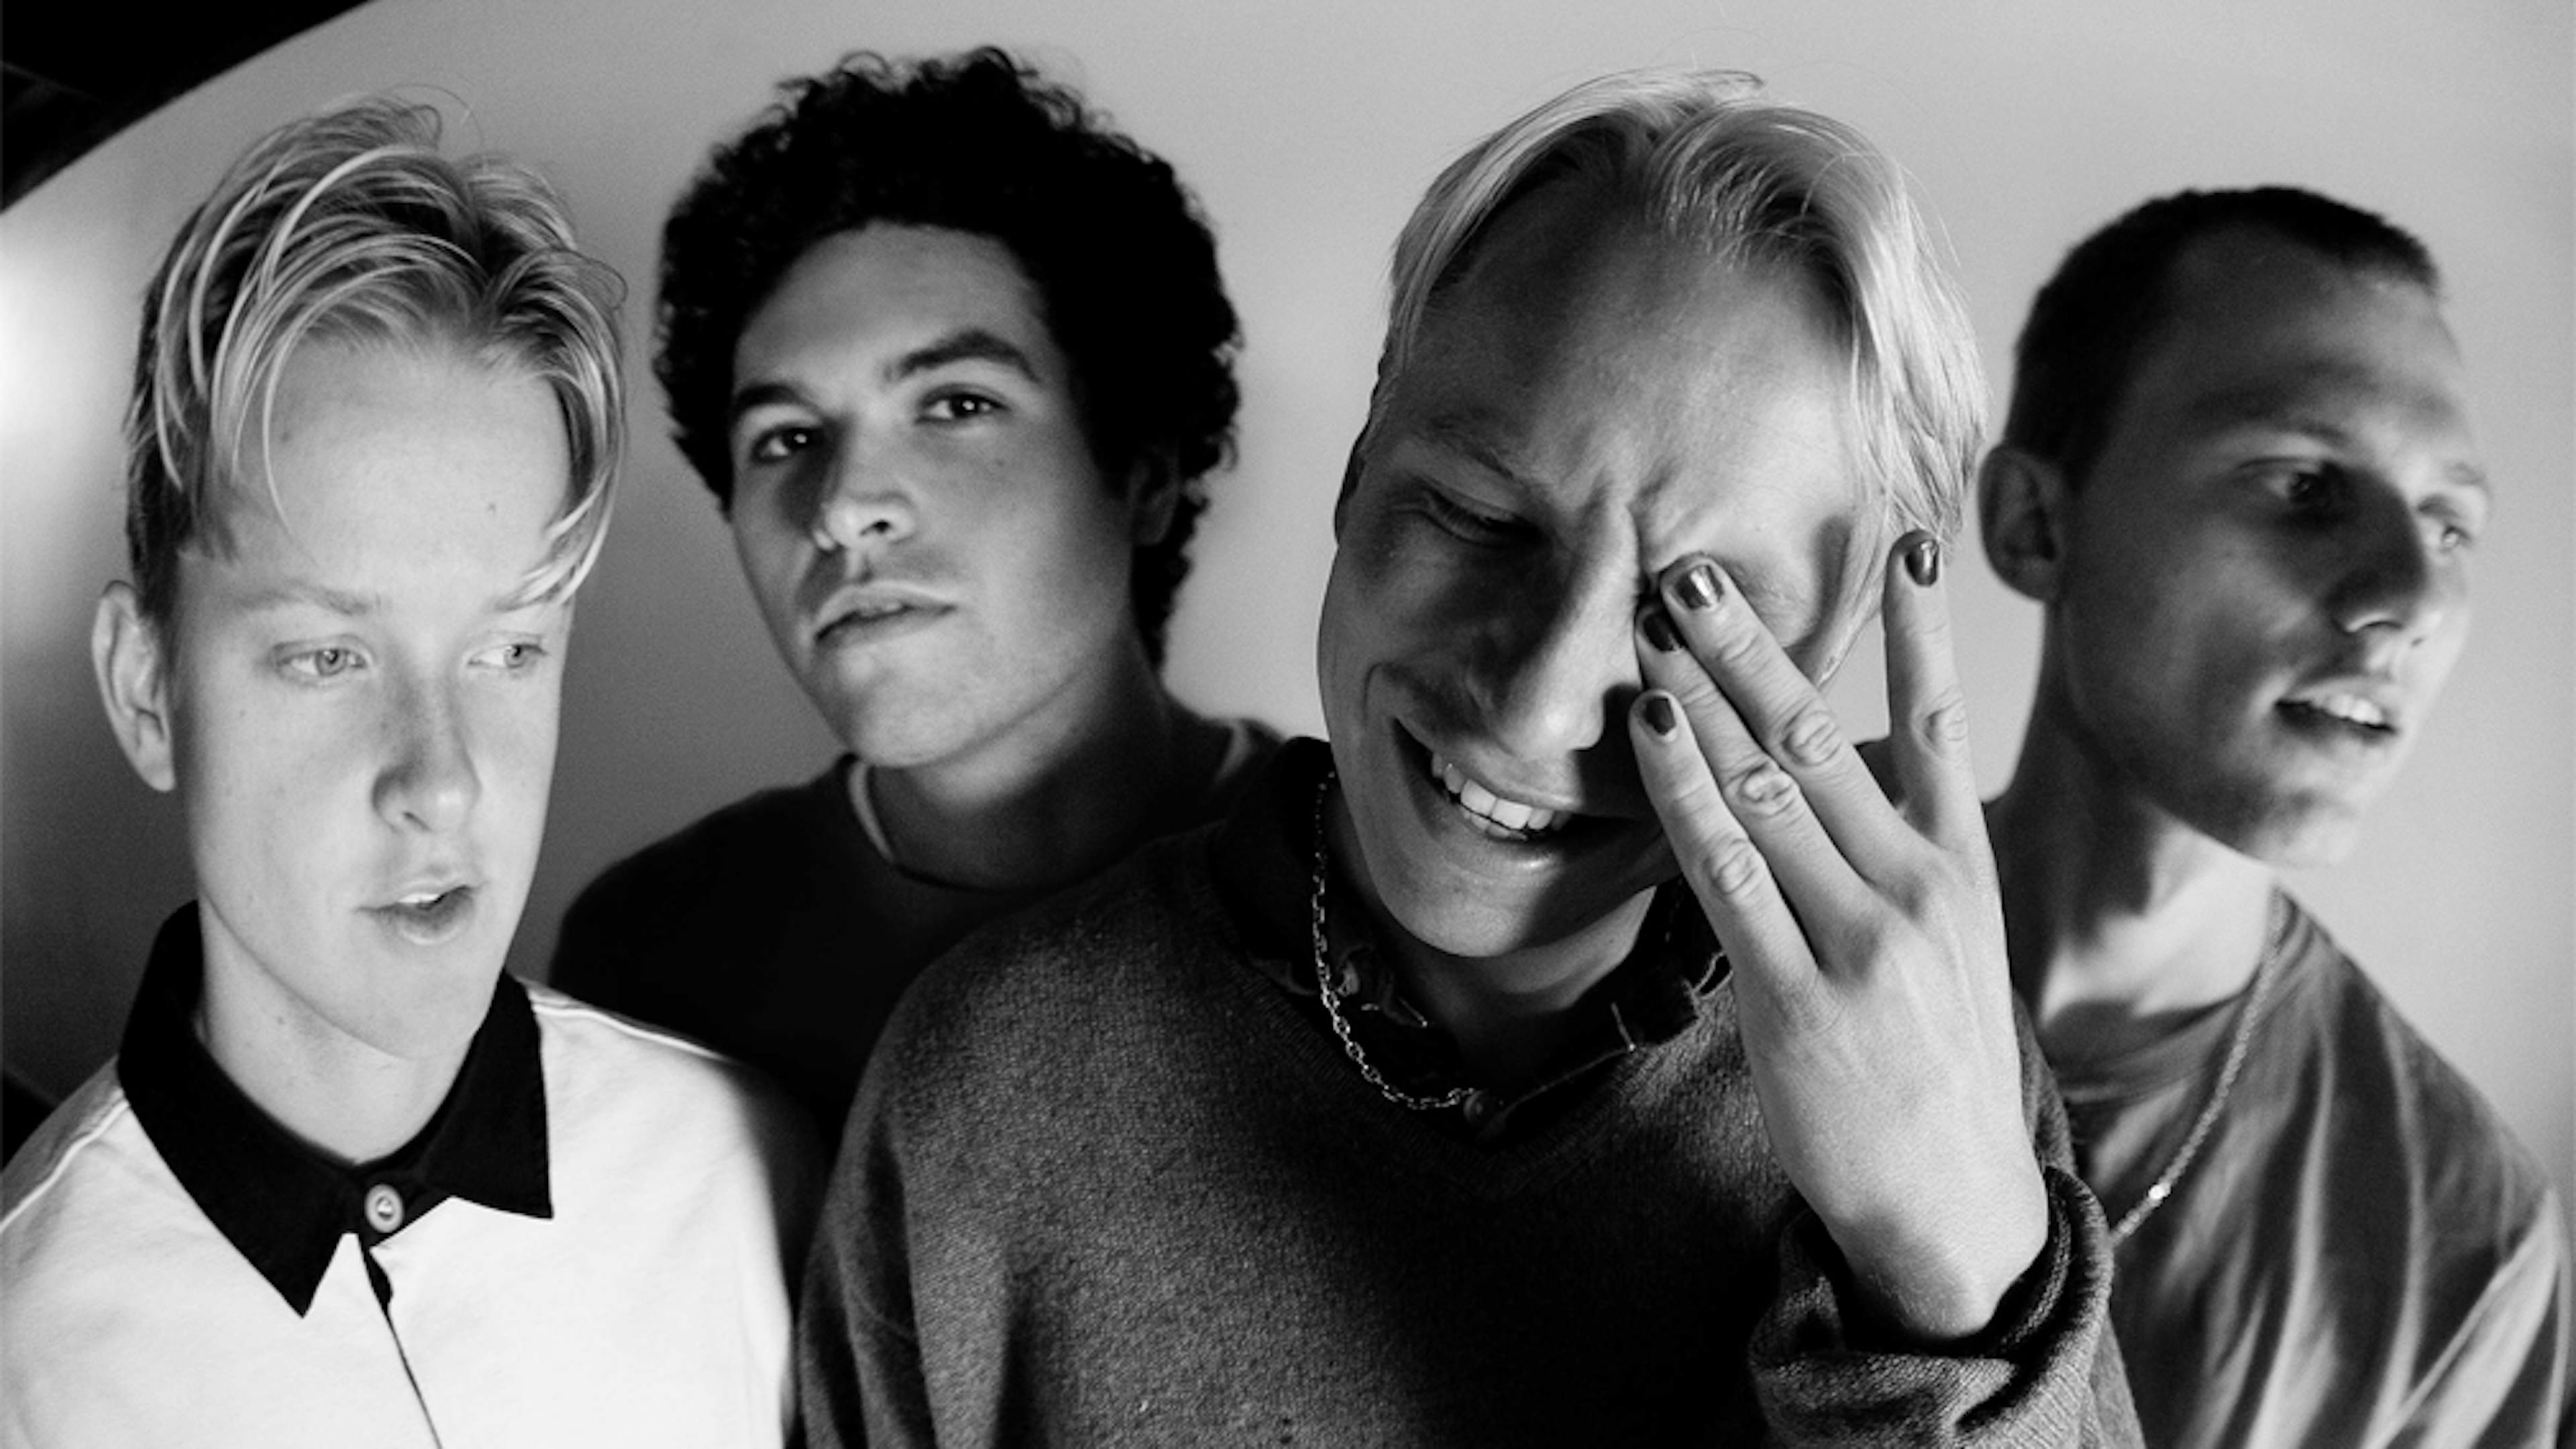 Listen To SWMRS' New Song, Trashbag Baby